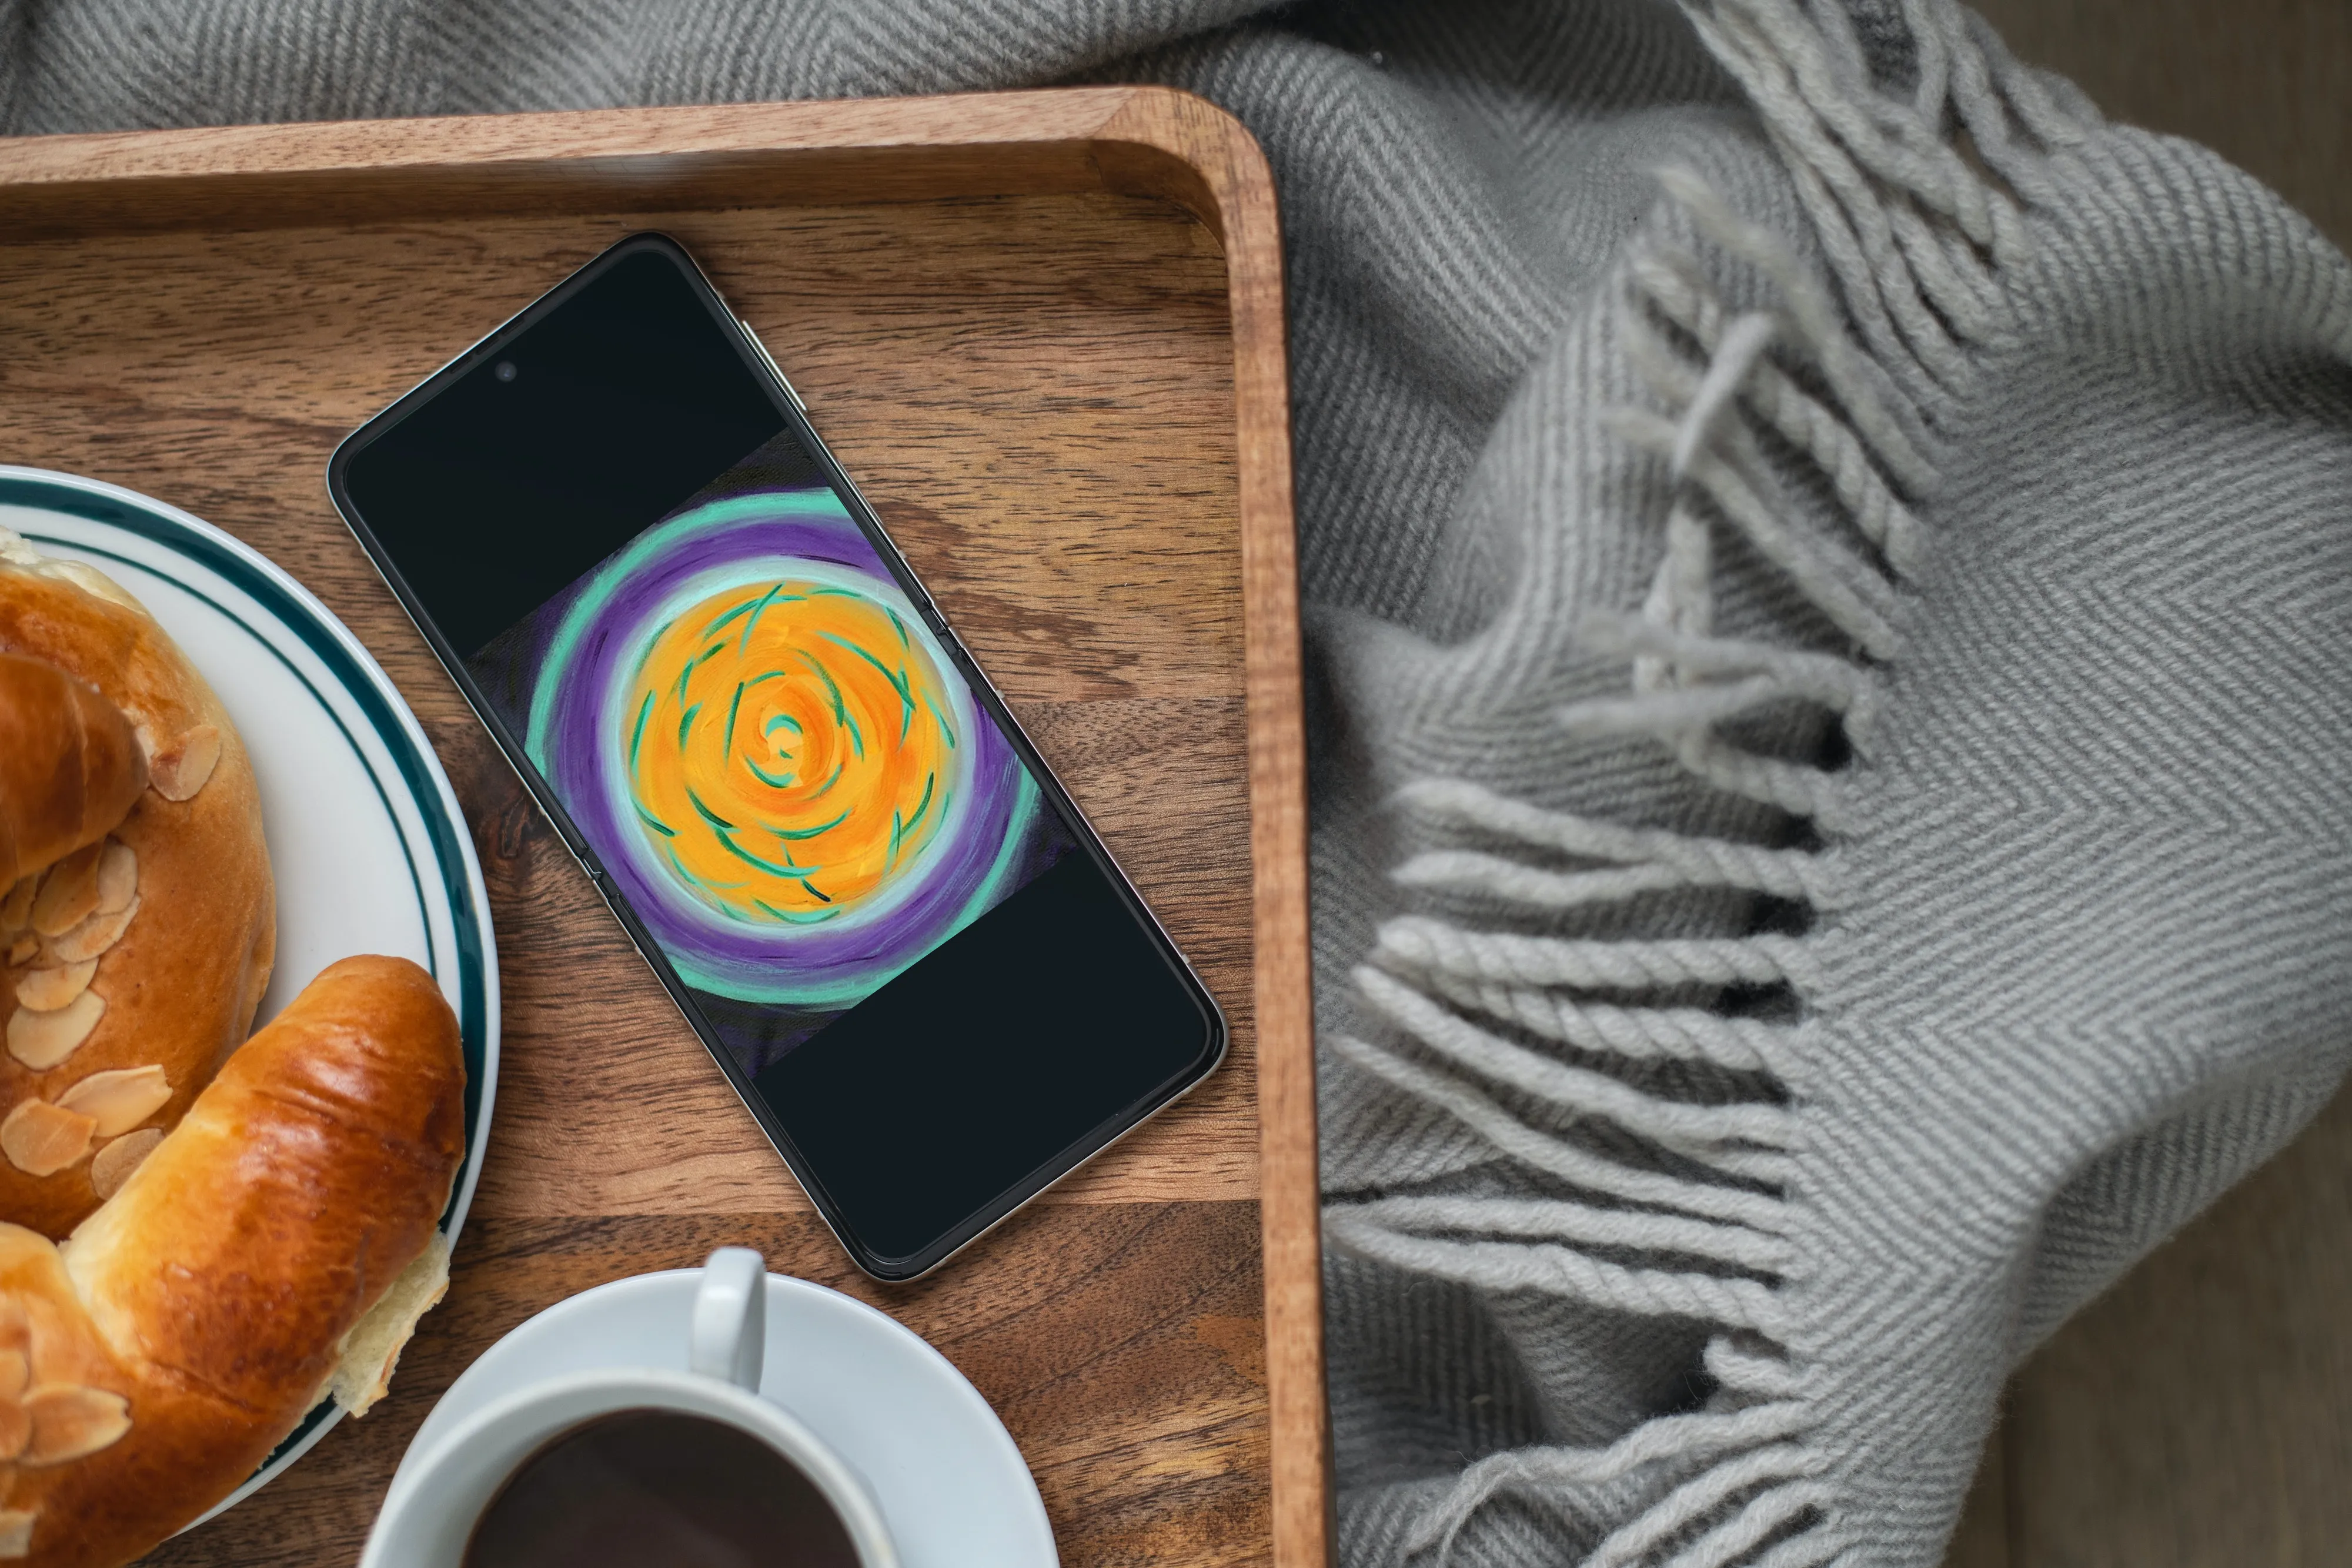 Personal Alignment Painting orange, yellow, teal, indigo  image on smartphone, laying on wooden tray with cup of coffee, croissant, next to gray blanket with tassels.